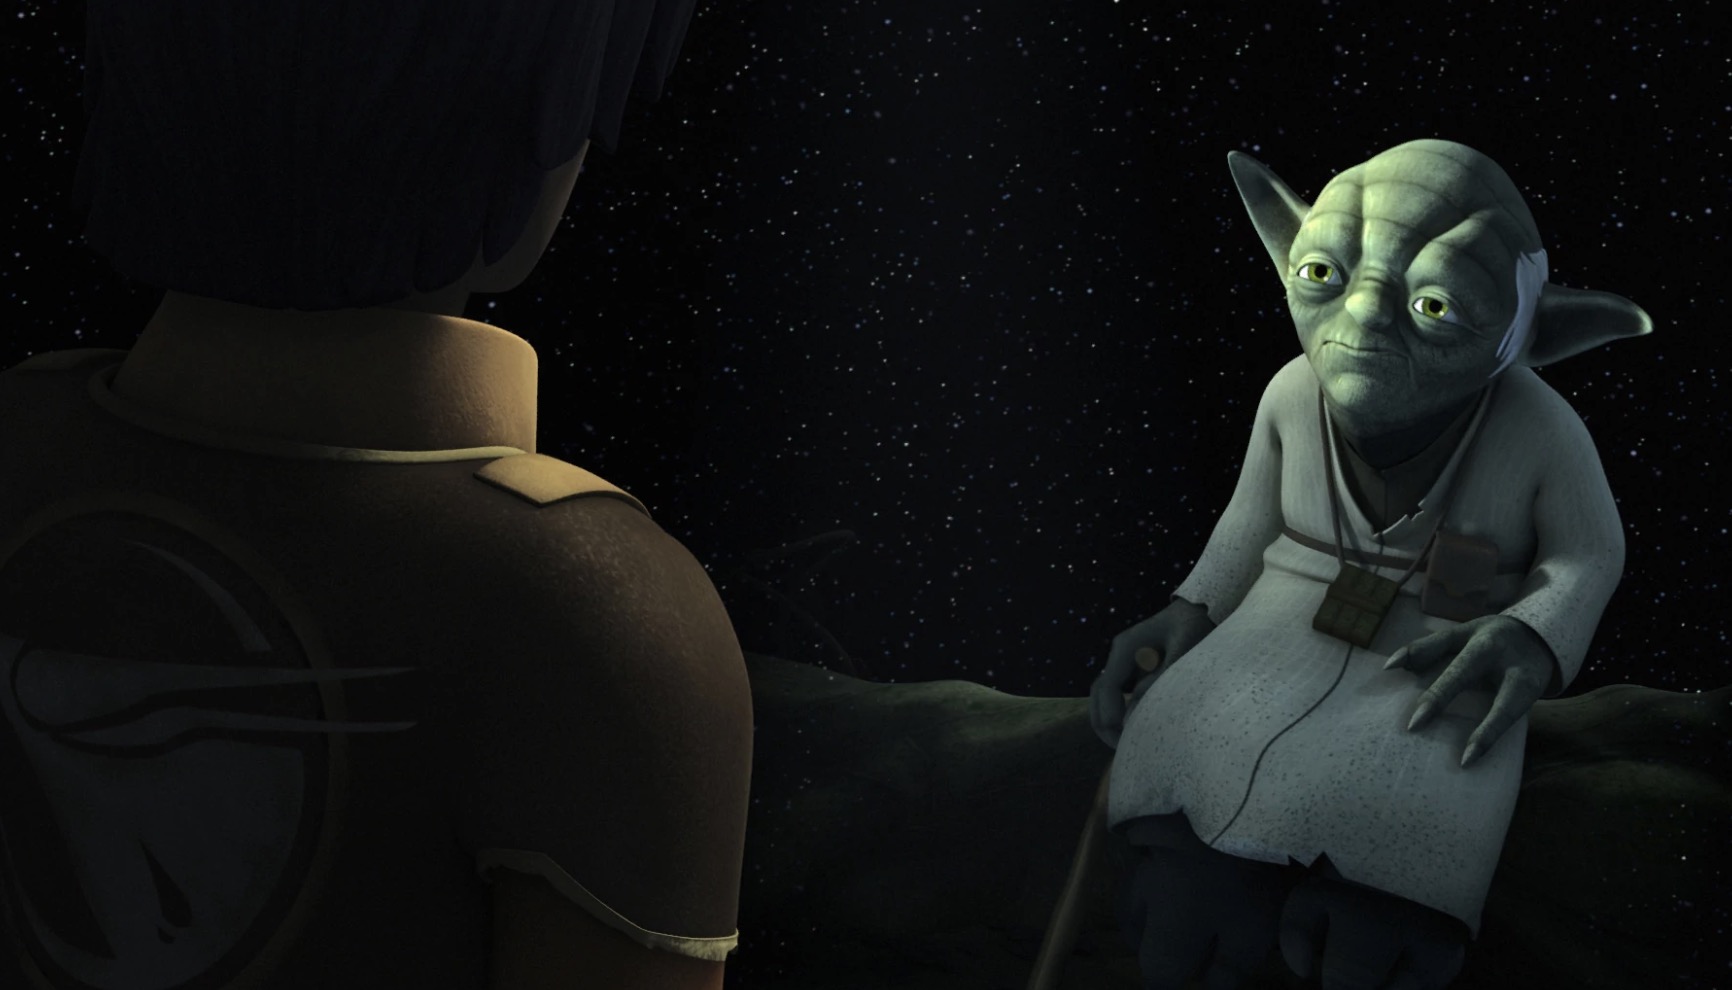 What The New Live-Action Star Wars Show Should Learn From Star Wars Rebels